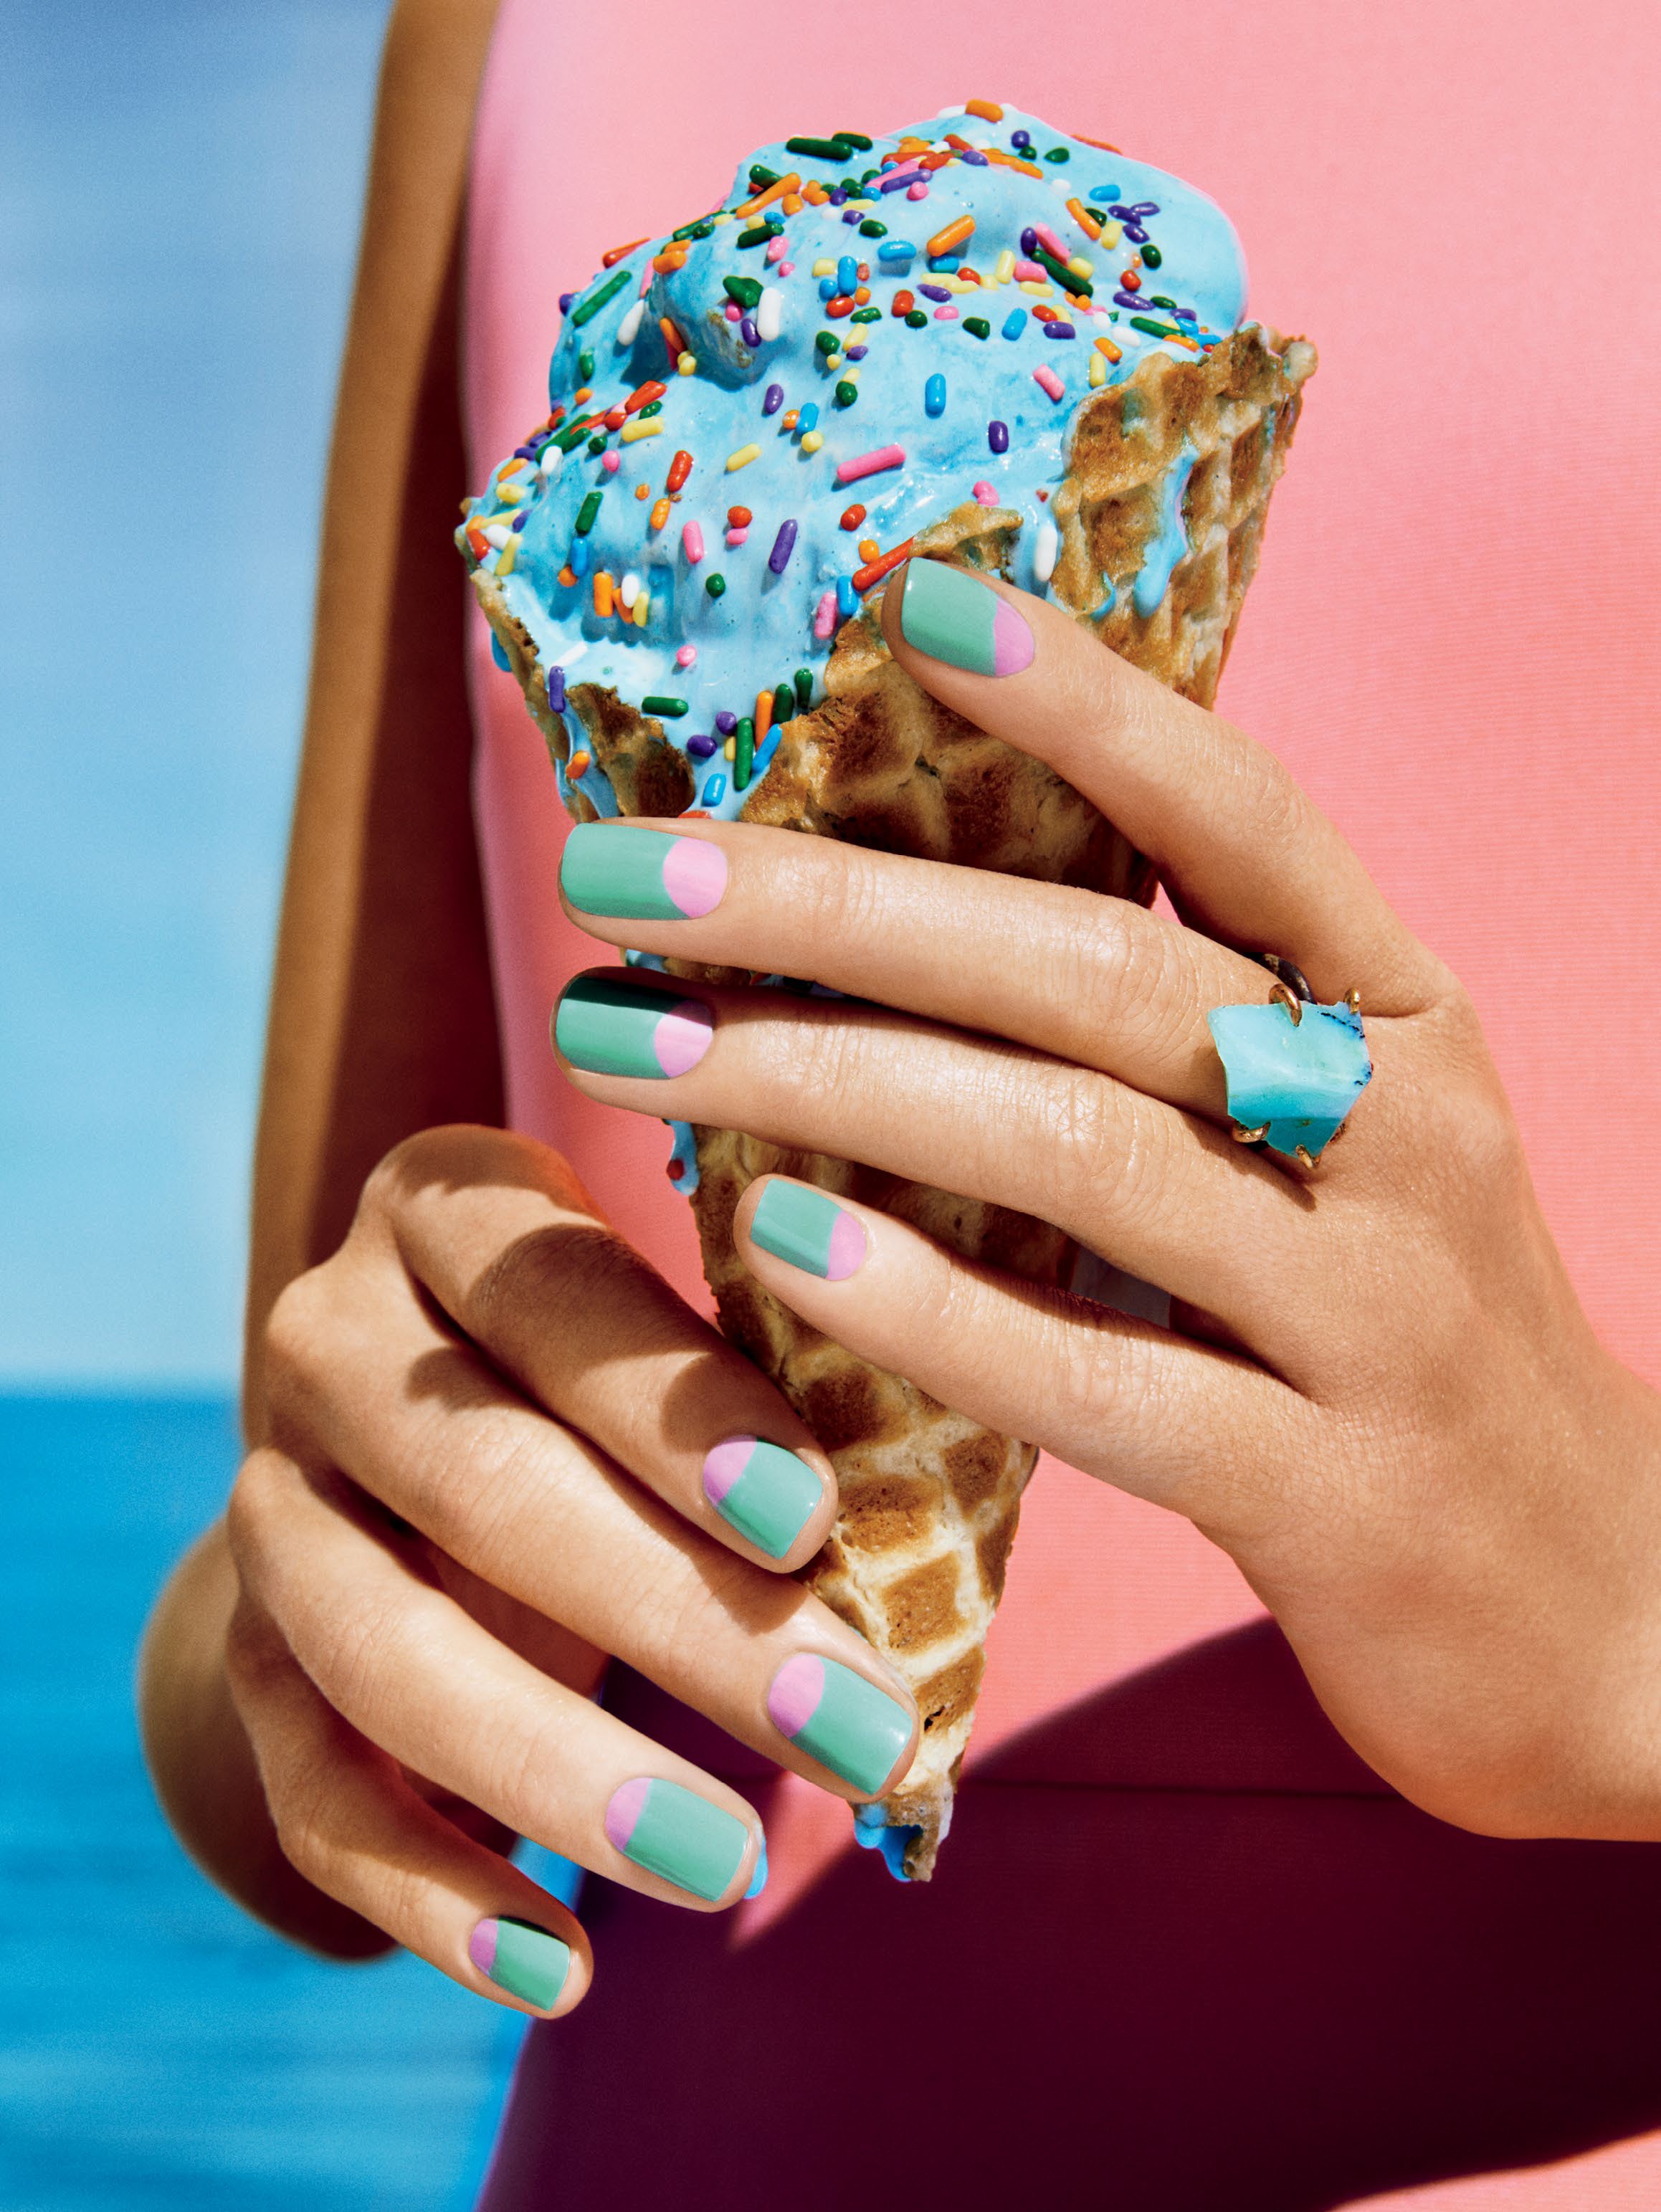 People 2317x3086 food ice cream hands painted nails manicured nails women